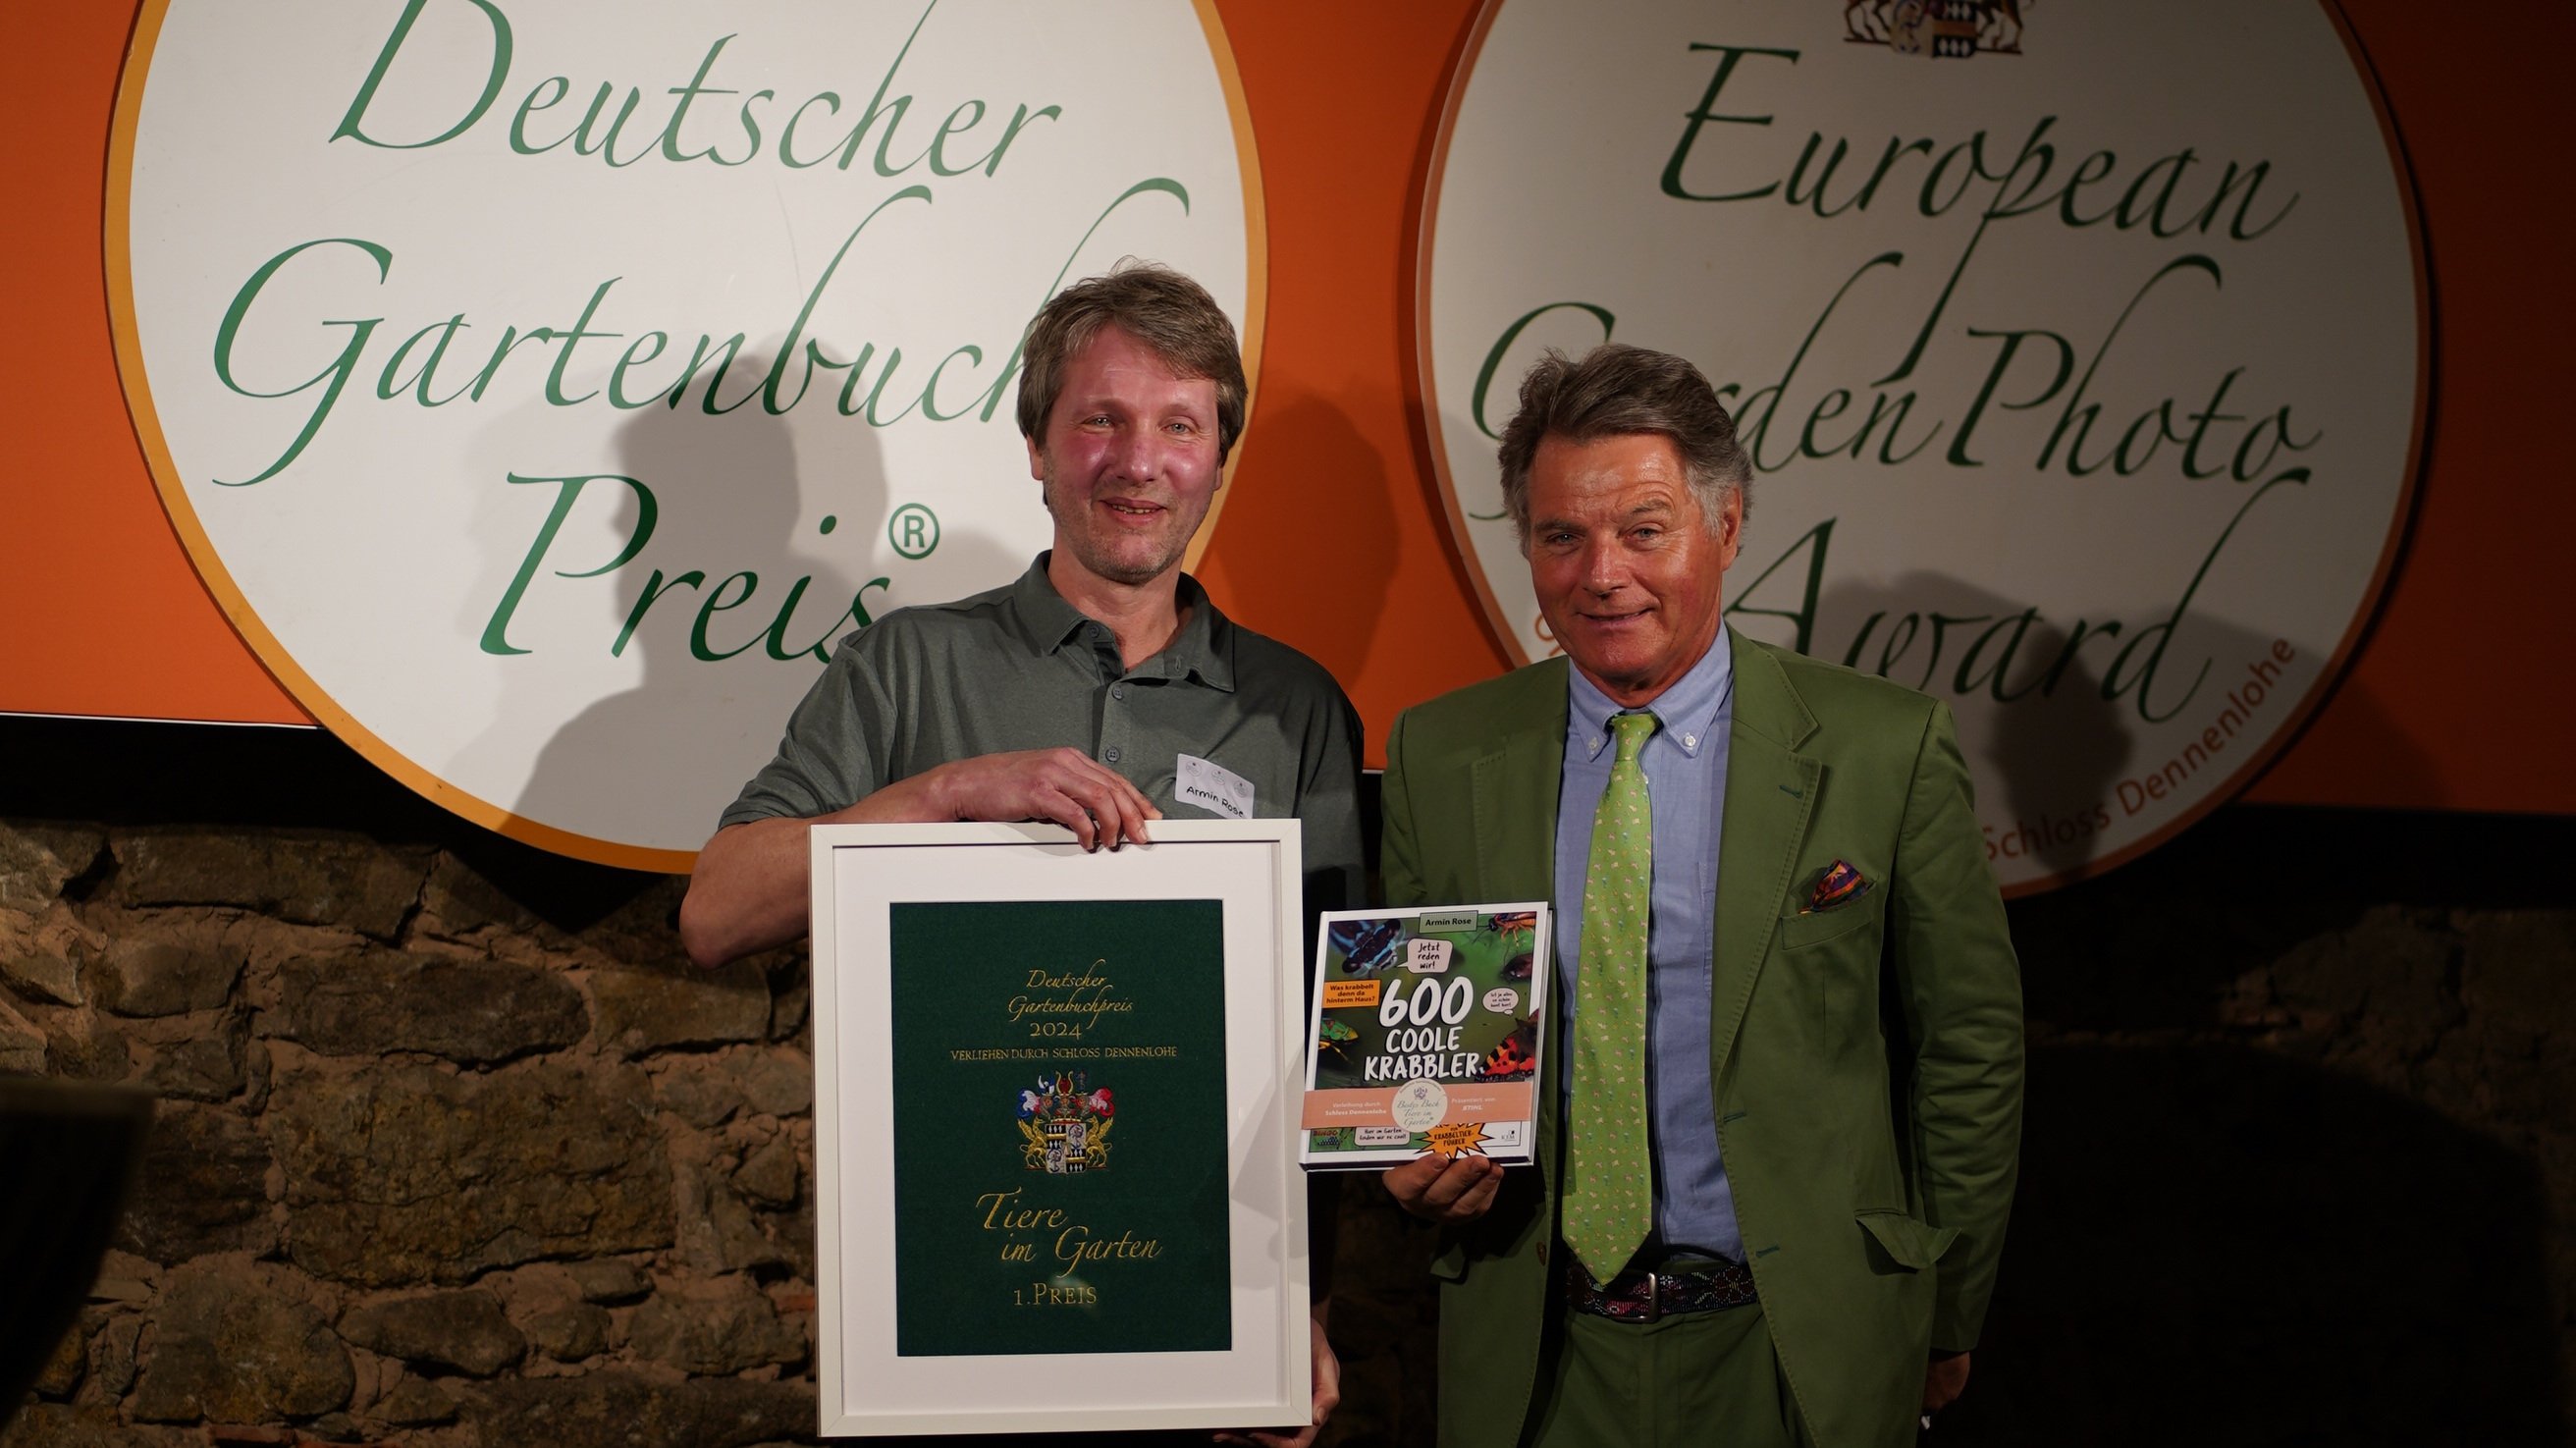 Our colleague Armin Rose (left) with Robert von Süsskind at the award ceremony for the German Garden Book Award at Schloss Dennelohe.